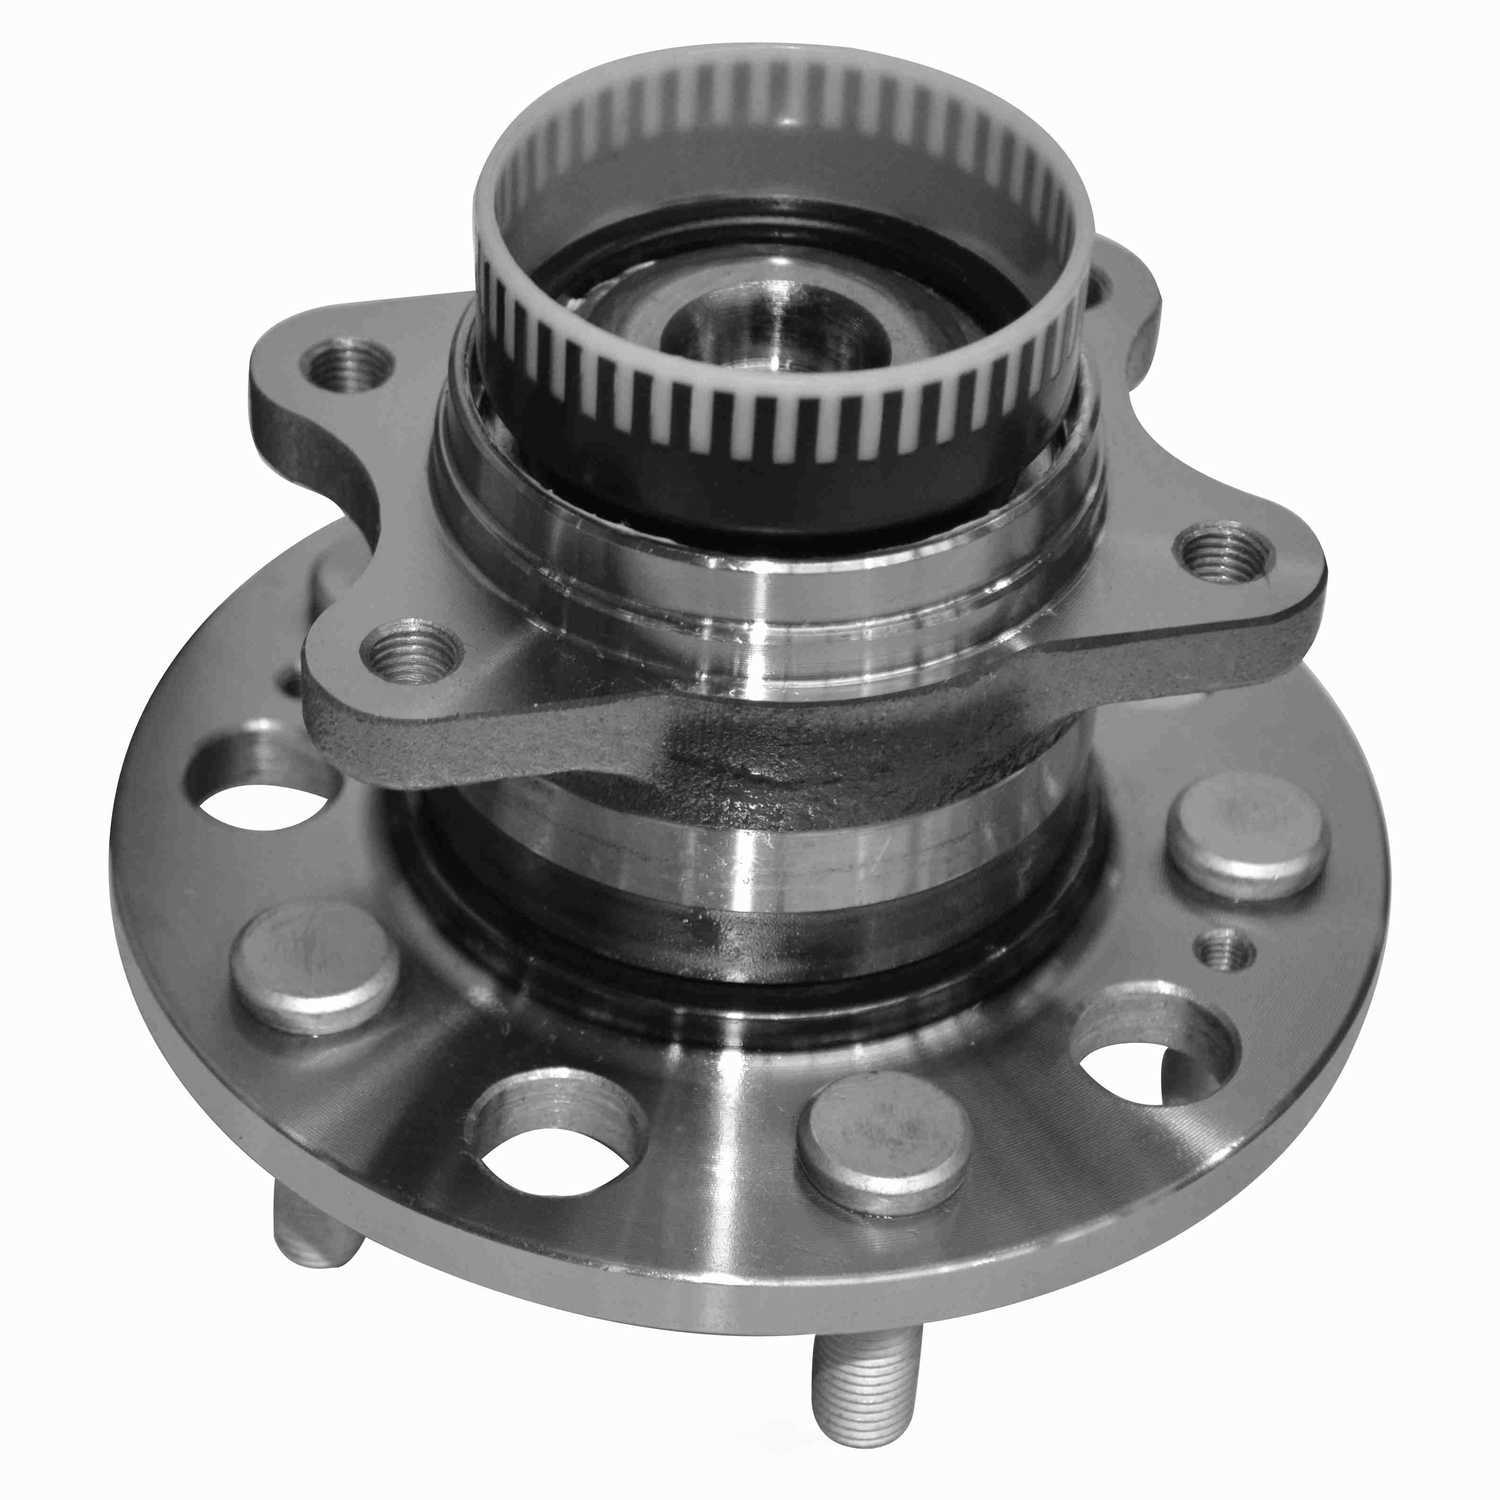 GSP NORTH AMERICA INC. - GSP New Wheel Bearing and Hub Assembly (Rear) - AD8 733437